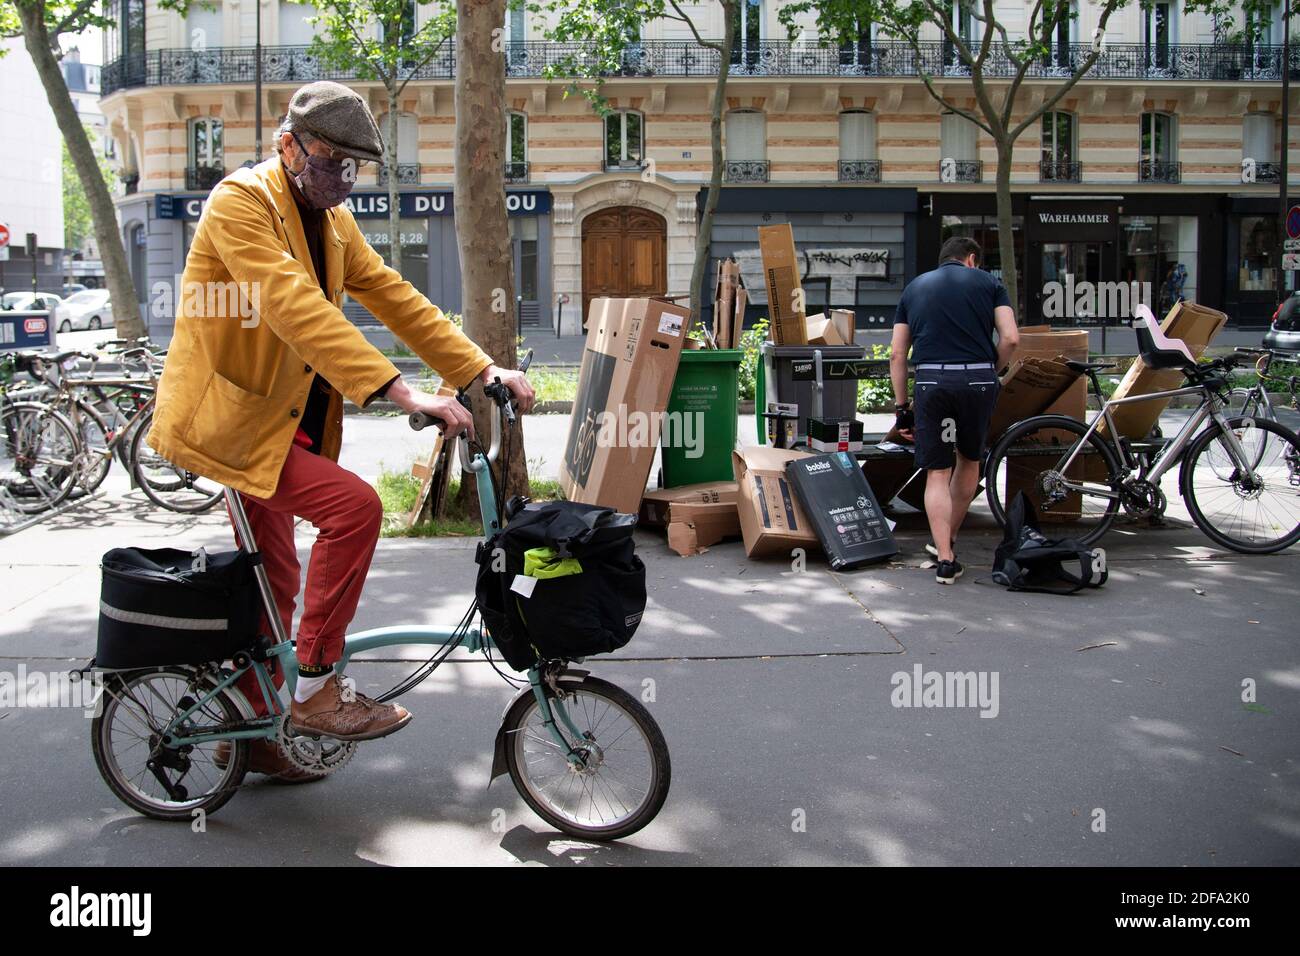 Portrait of the shop owner on a bicycle at the Bicloune bicycle shop in  Paris, France on May 13, 2020. As the French capital emerges from 55 days  of lockdown and slowly